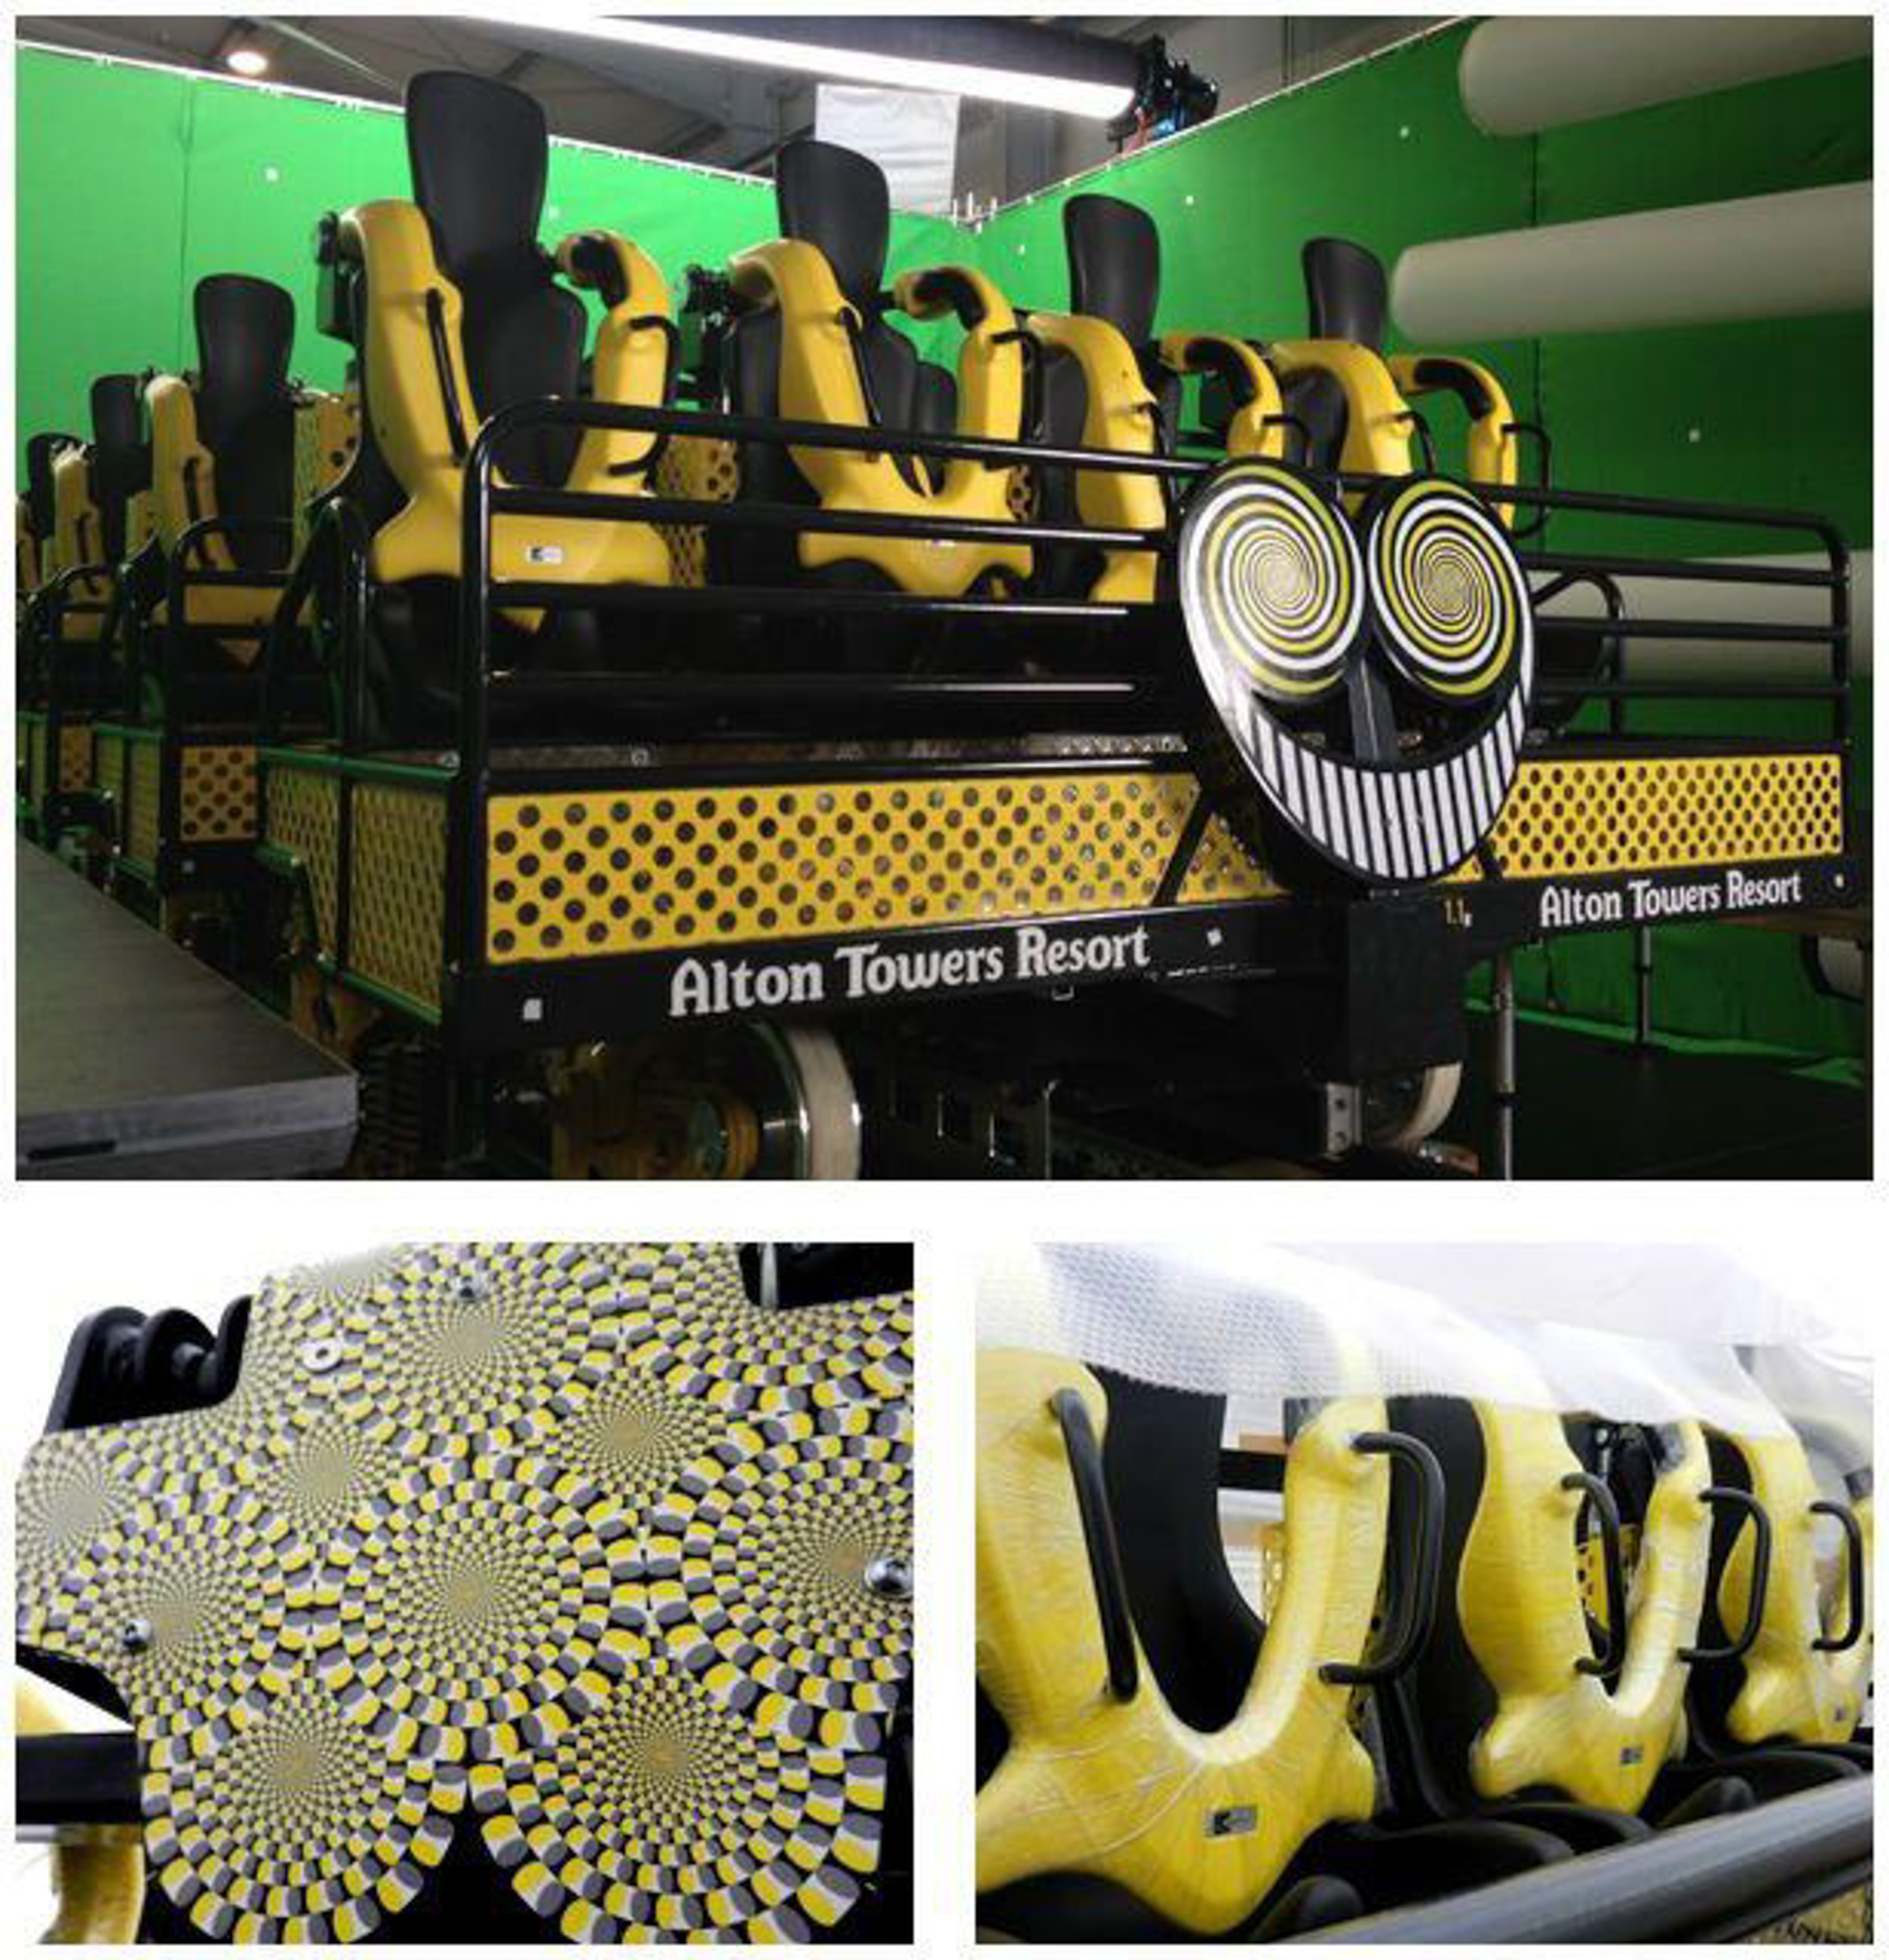 The Smiler ride cars unveiled